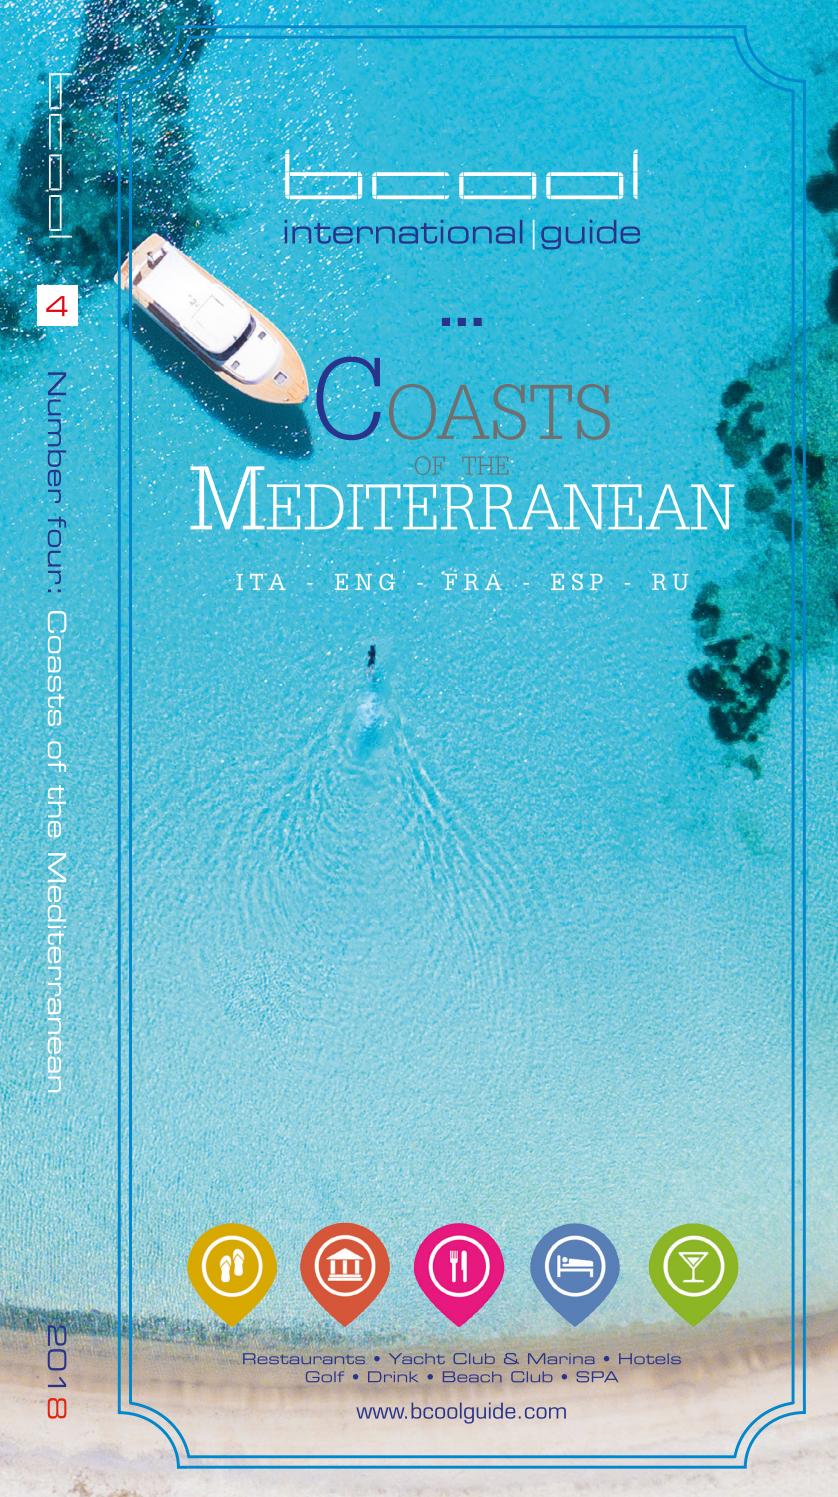 Salon De Jardin Le Roy Merlin Charmant 2018 Bcool Guide "coasts Of the Mediterrean" by Bcool City